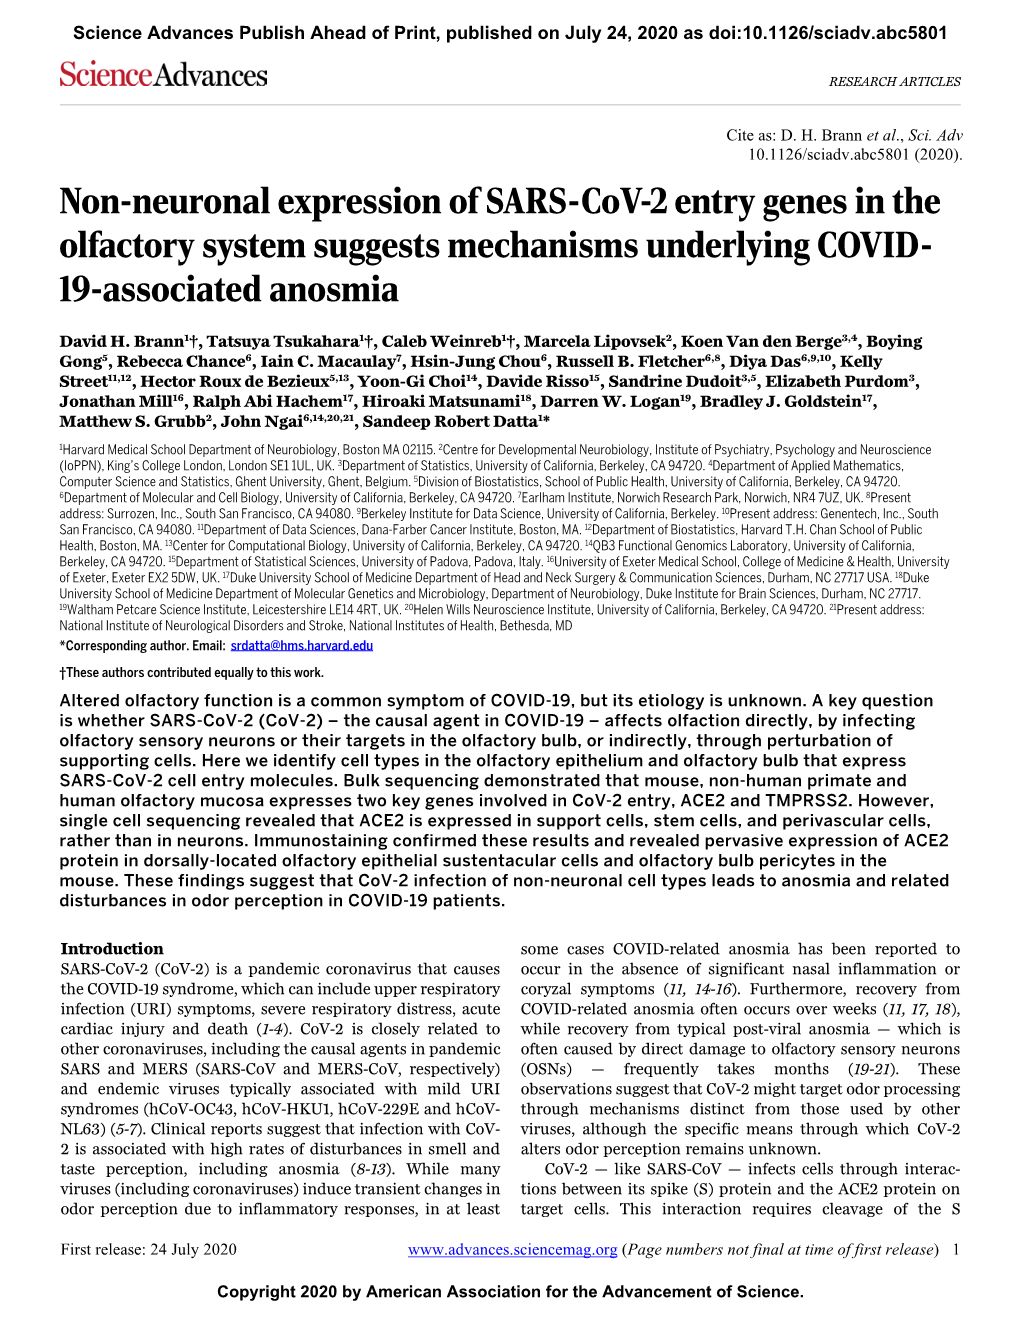 Non-Neuronal Expression of SARS-Cov-2 Entry Genes in the Olfactory System Suggests Mechanisms Underlying COVID- 19-Associated Anosmia